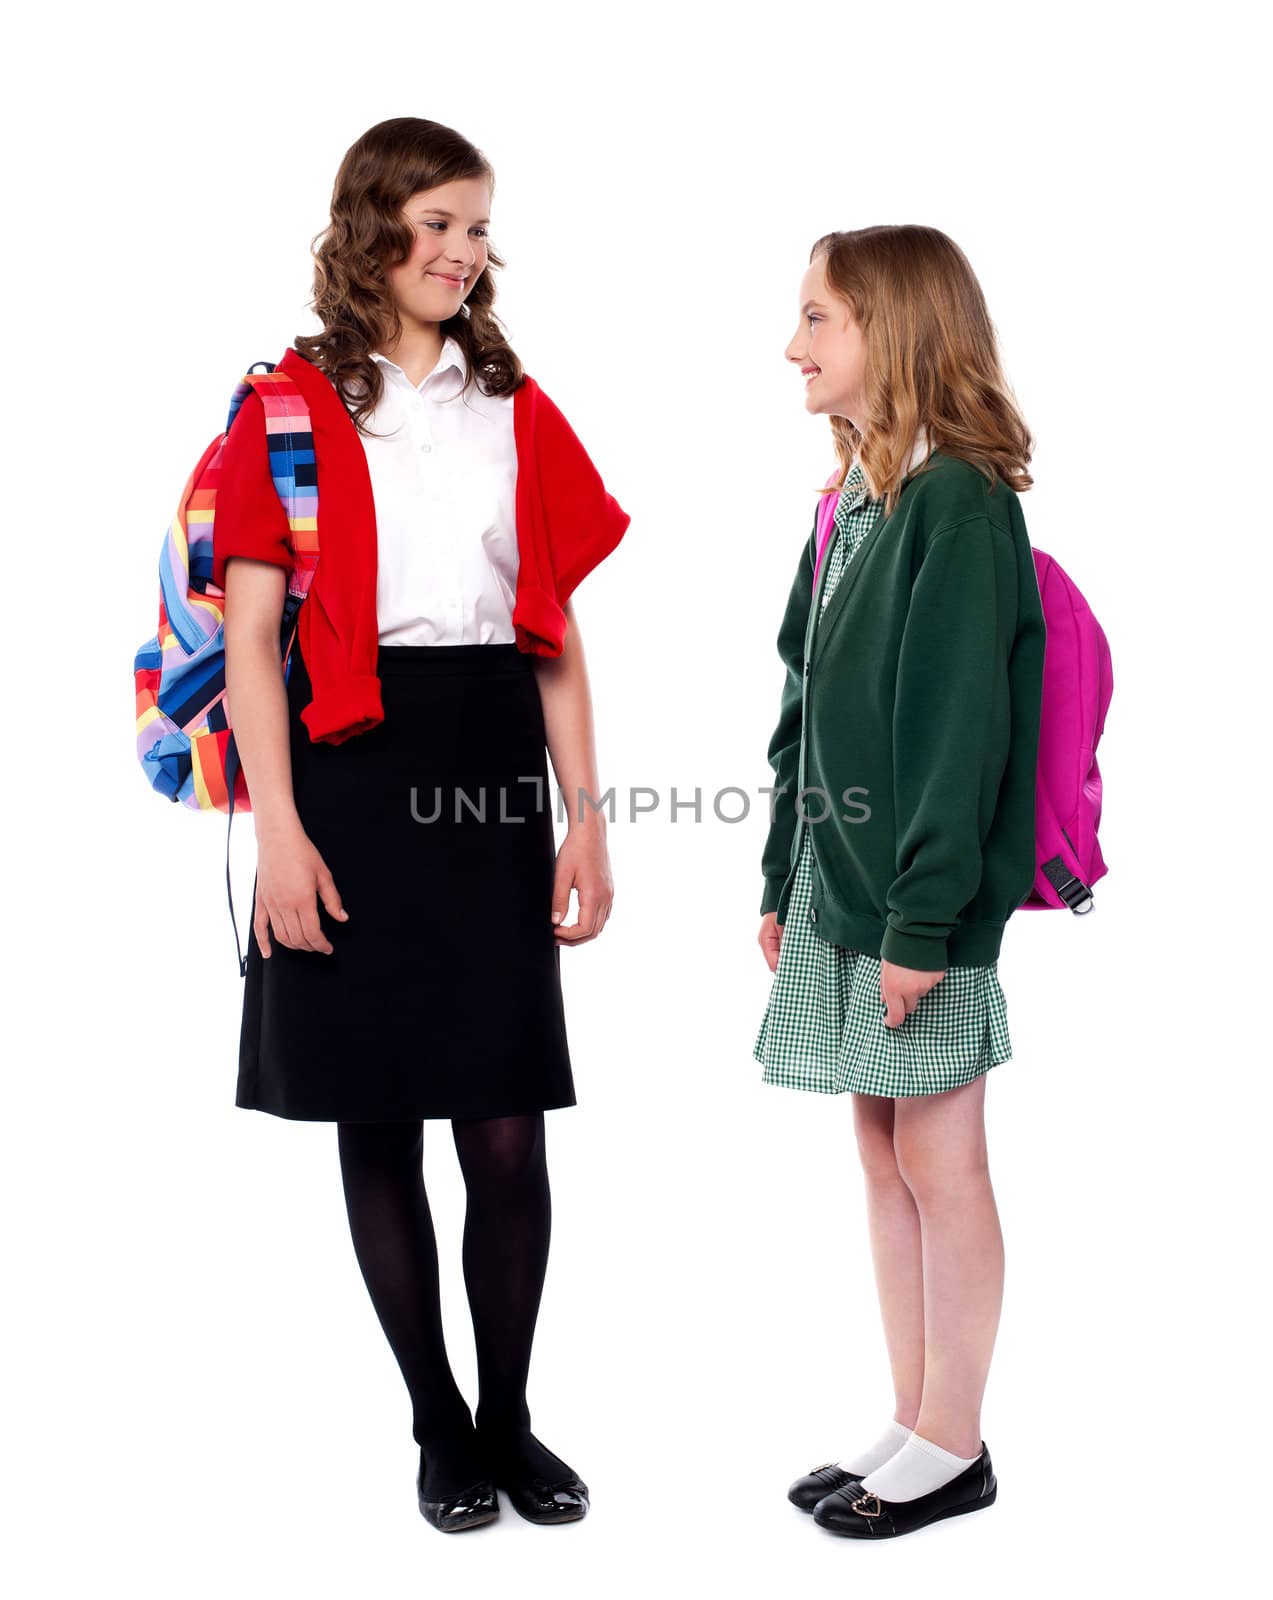 Teenagers discussing their day at school with each other over white background